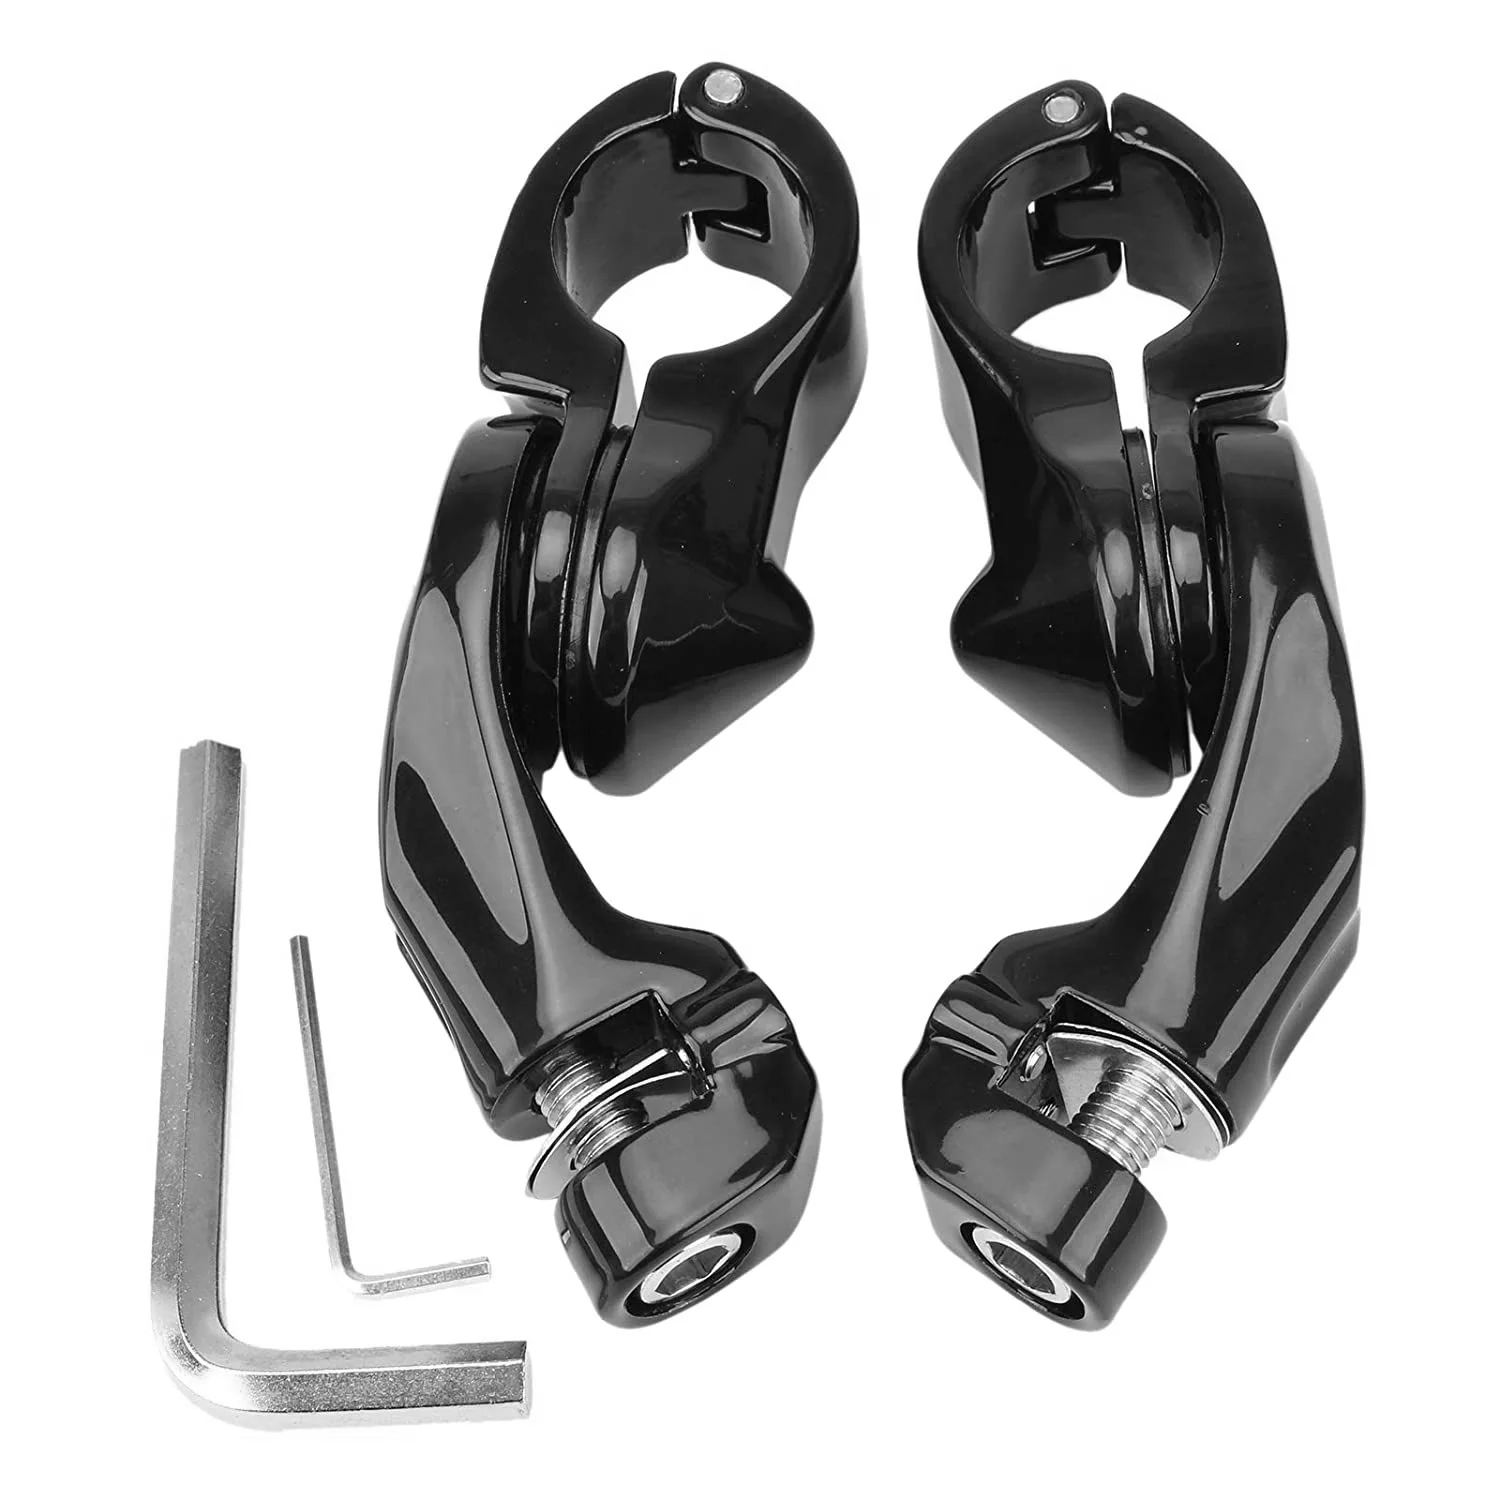 

1 Pair Motorcycle Foot Pegs Highway Adjustable Short Angled 1 1/4 Inch 32mm Engine Guard Footrest Brackets